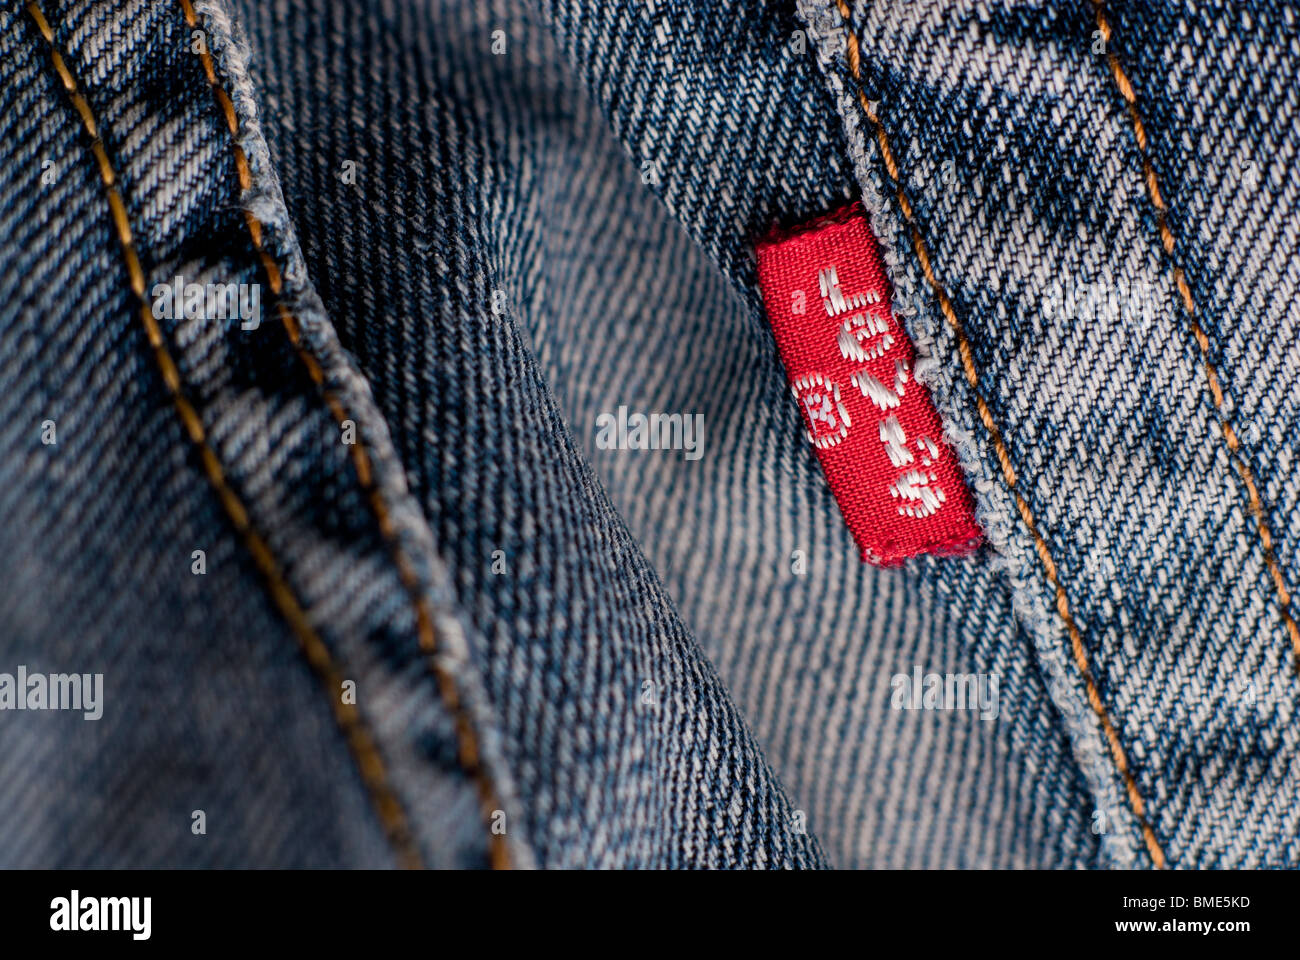 Levis Red Tab High Resolution Stock Photography and Images - Alamy